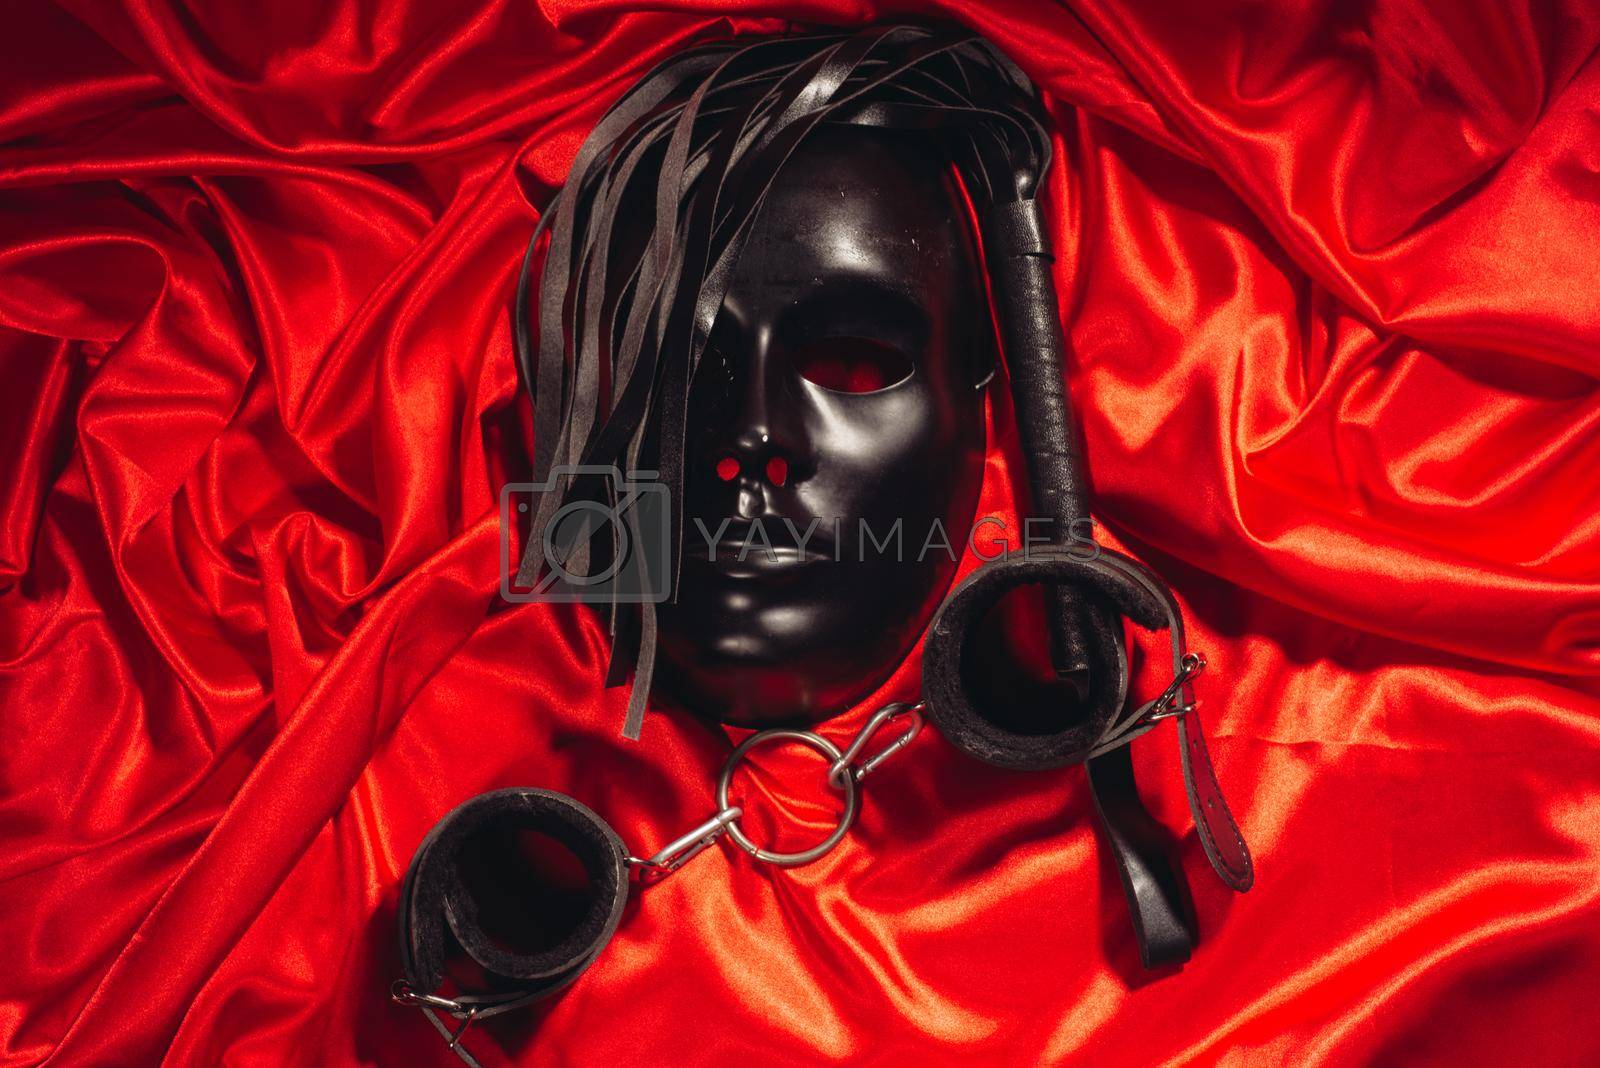 Bondage, kinky adult sex games, kink and BDSM lifestyle concept with a mask, pair of leather handcuffs, flogger, ball gag and a coller with a leash attached on red silk with copy space